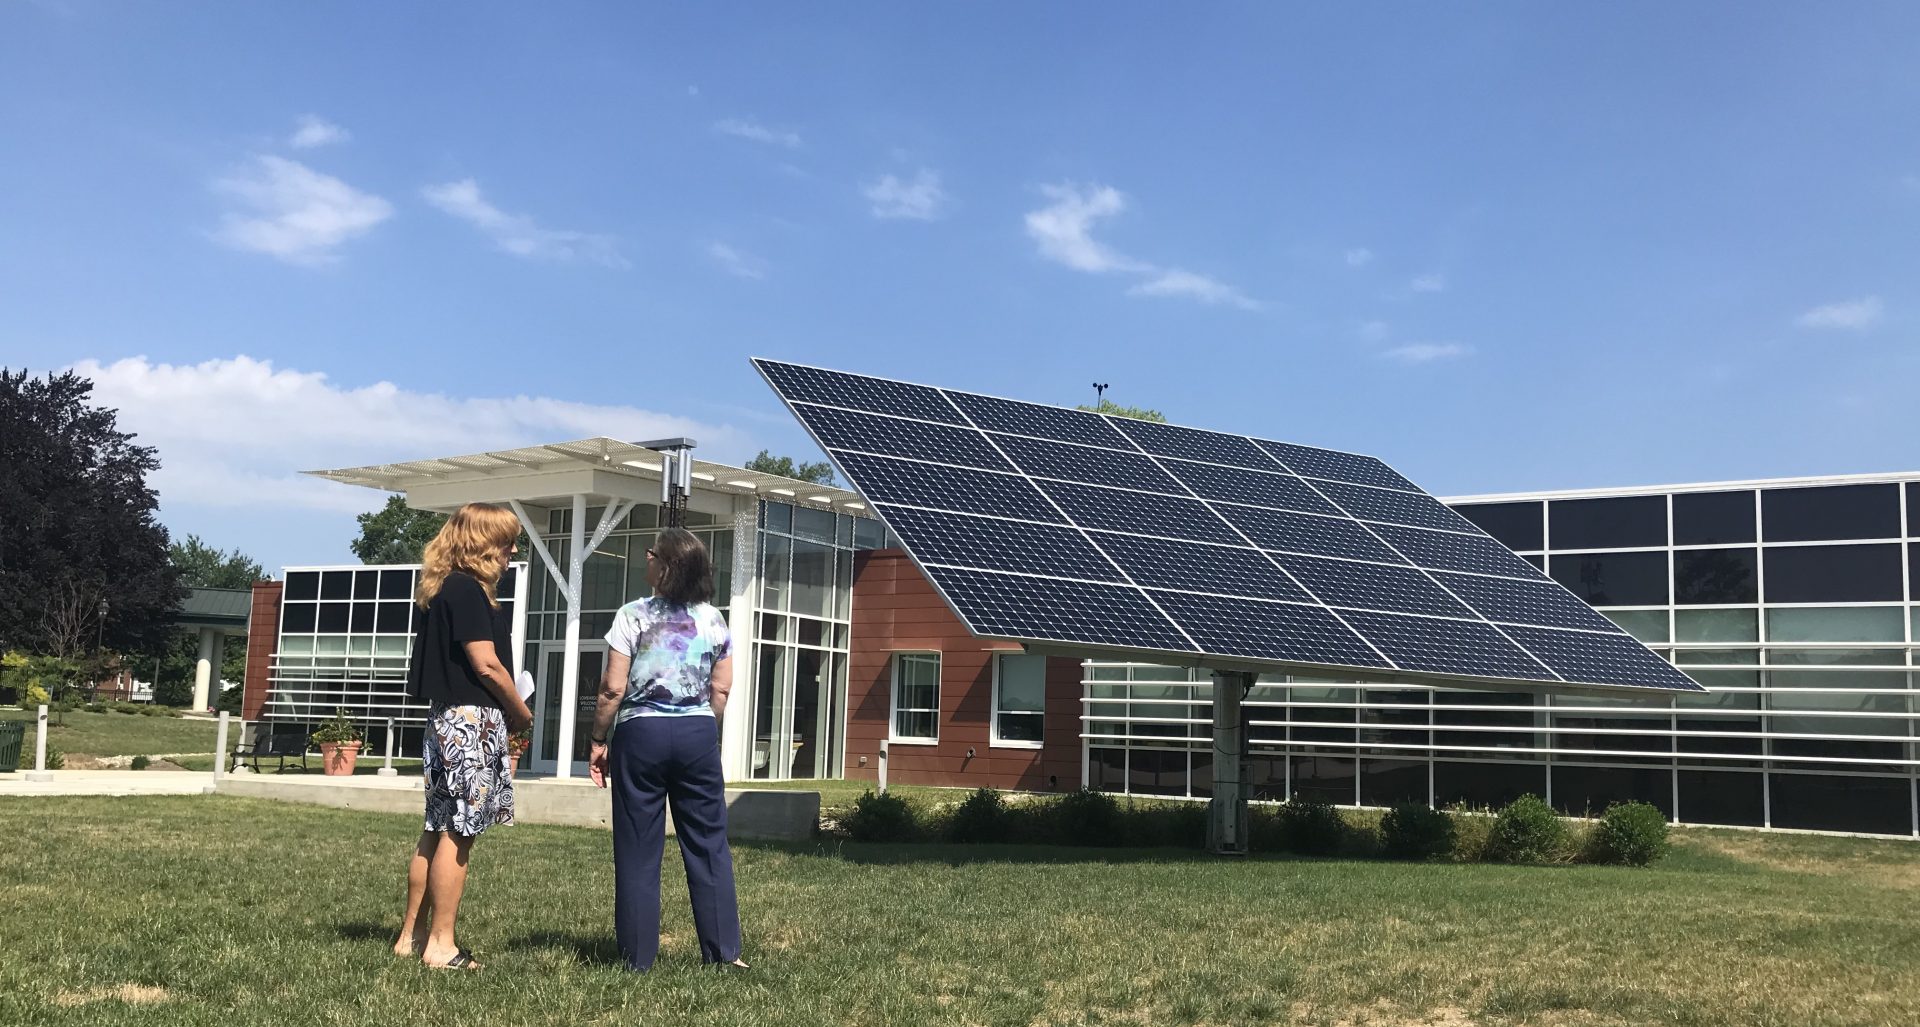 The Lombardo Welcome Center at Millersville University produced 75 percent more energy than it consumed in 2018.